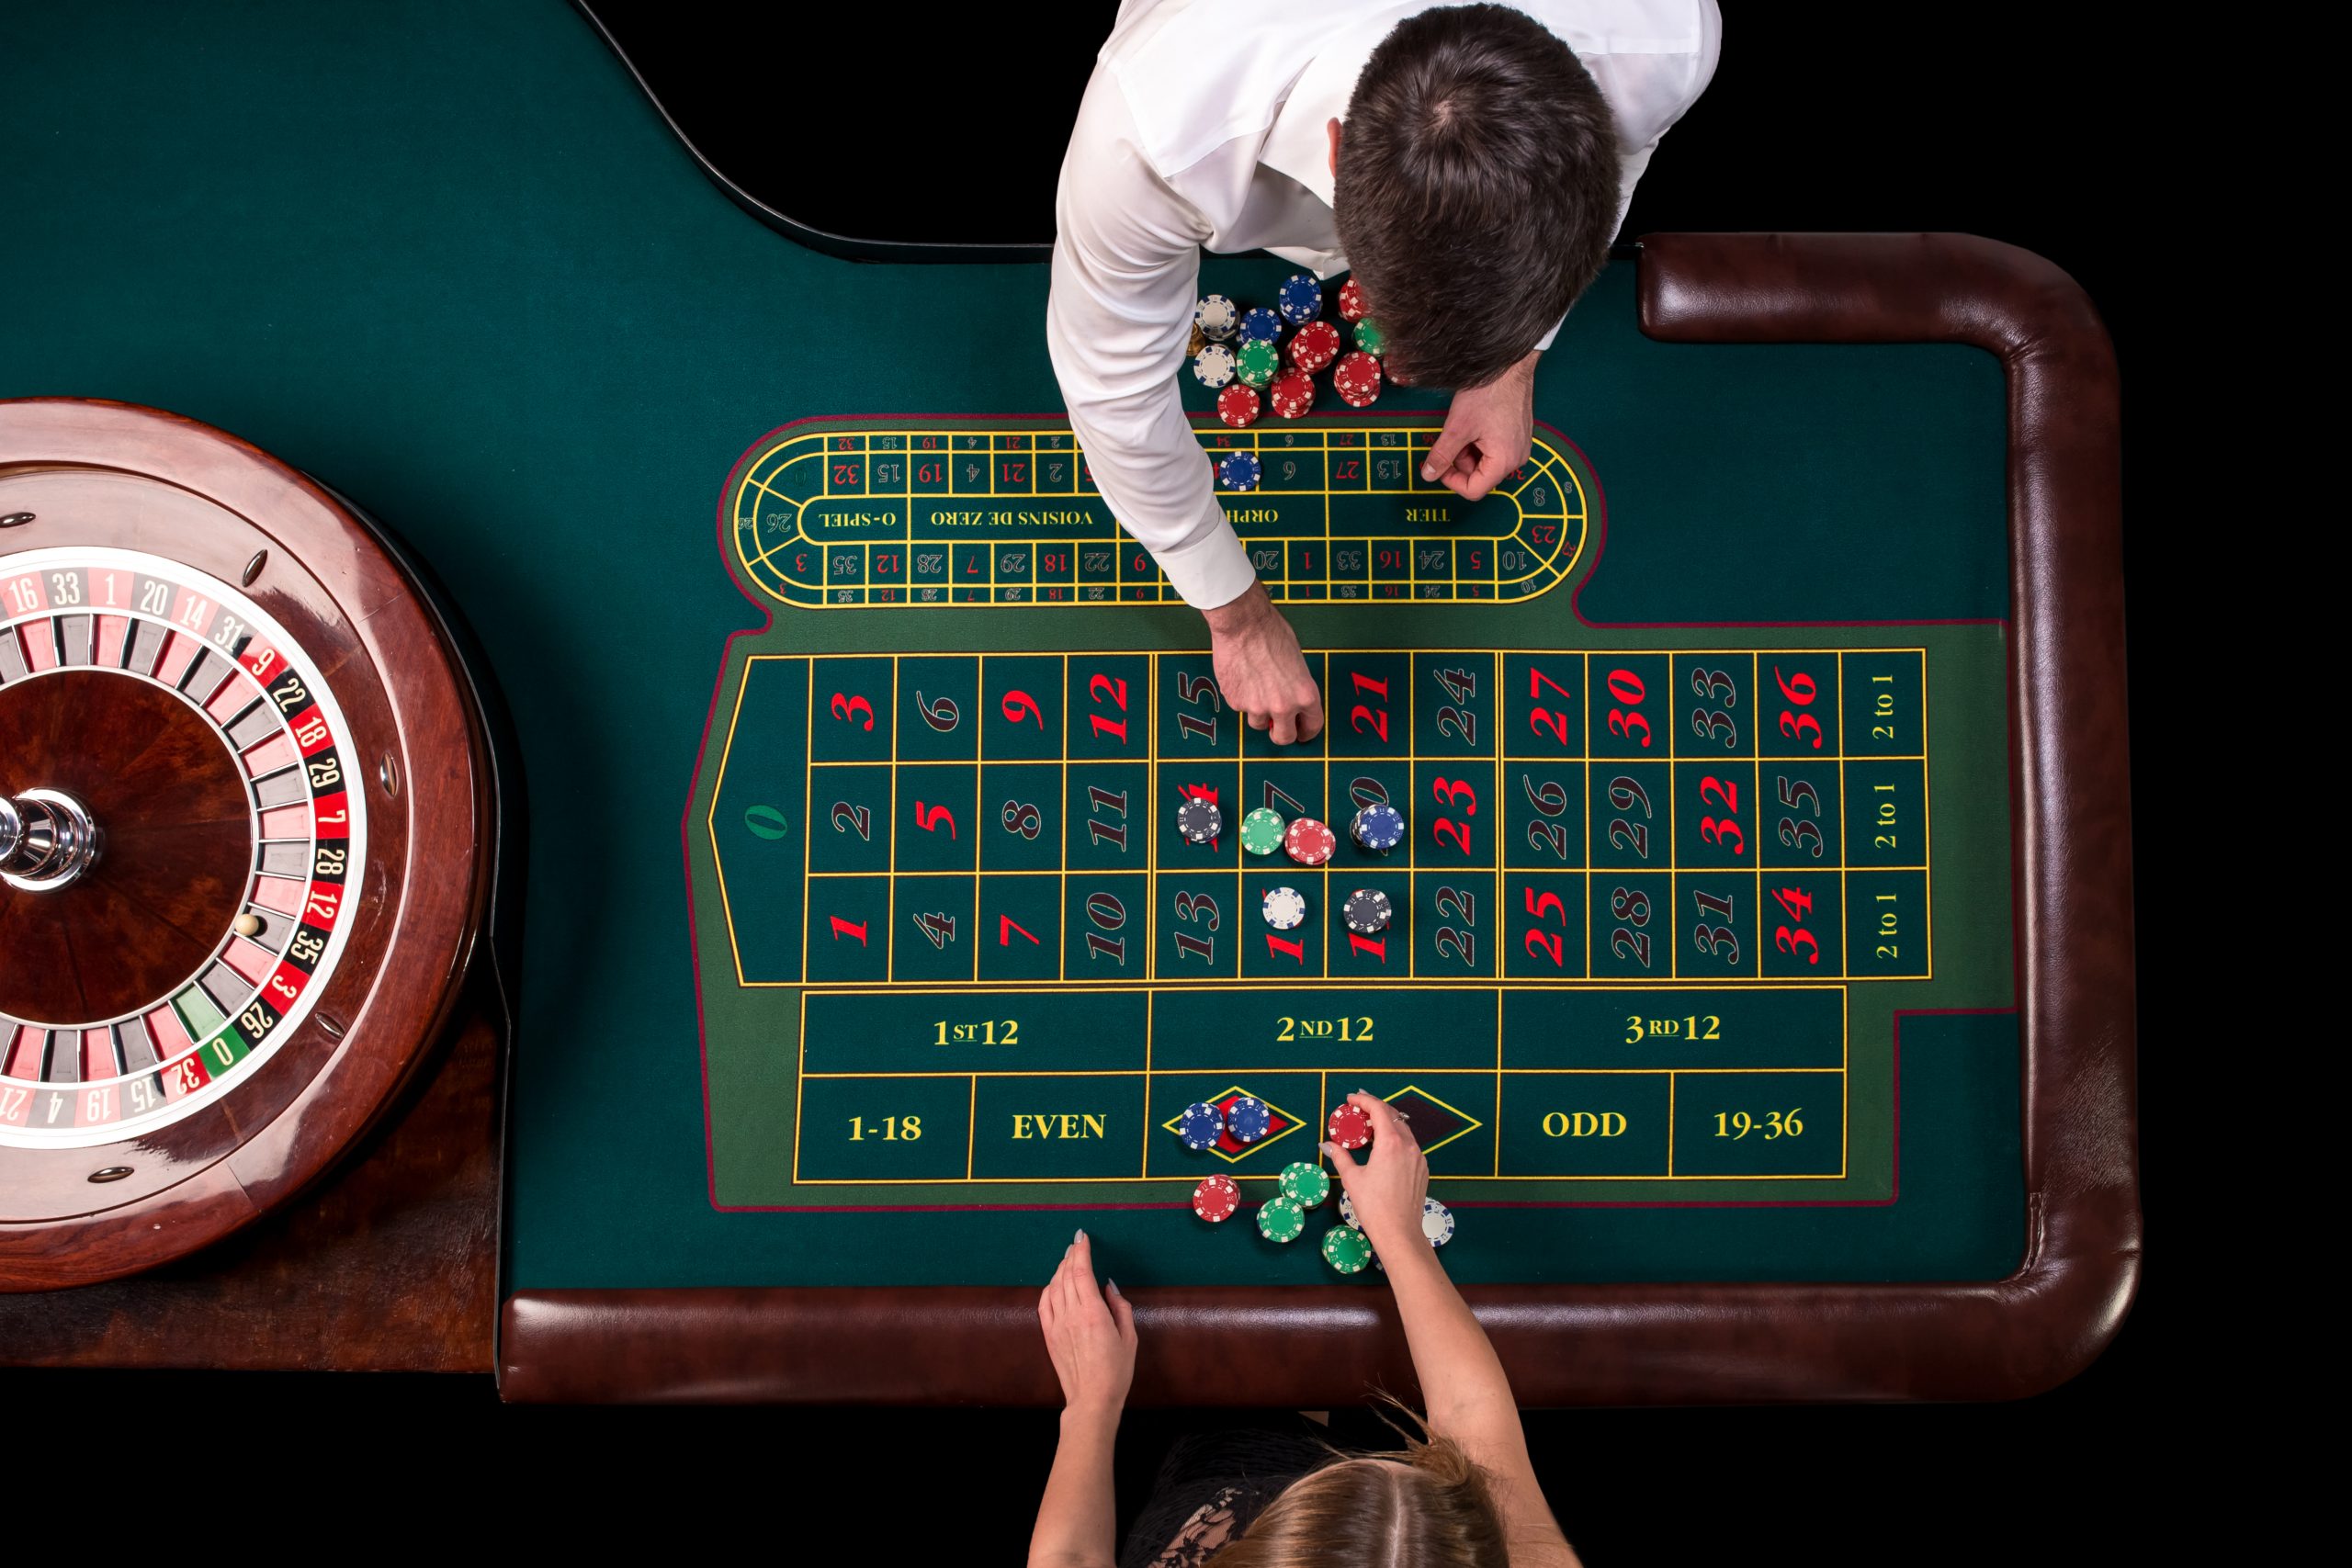 Man croupier and woman playing roulette at the table in the casino. Top view at a roulette green table with a tape measure.